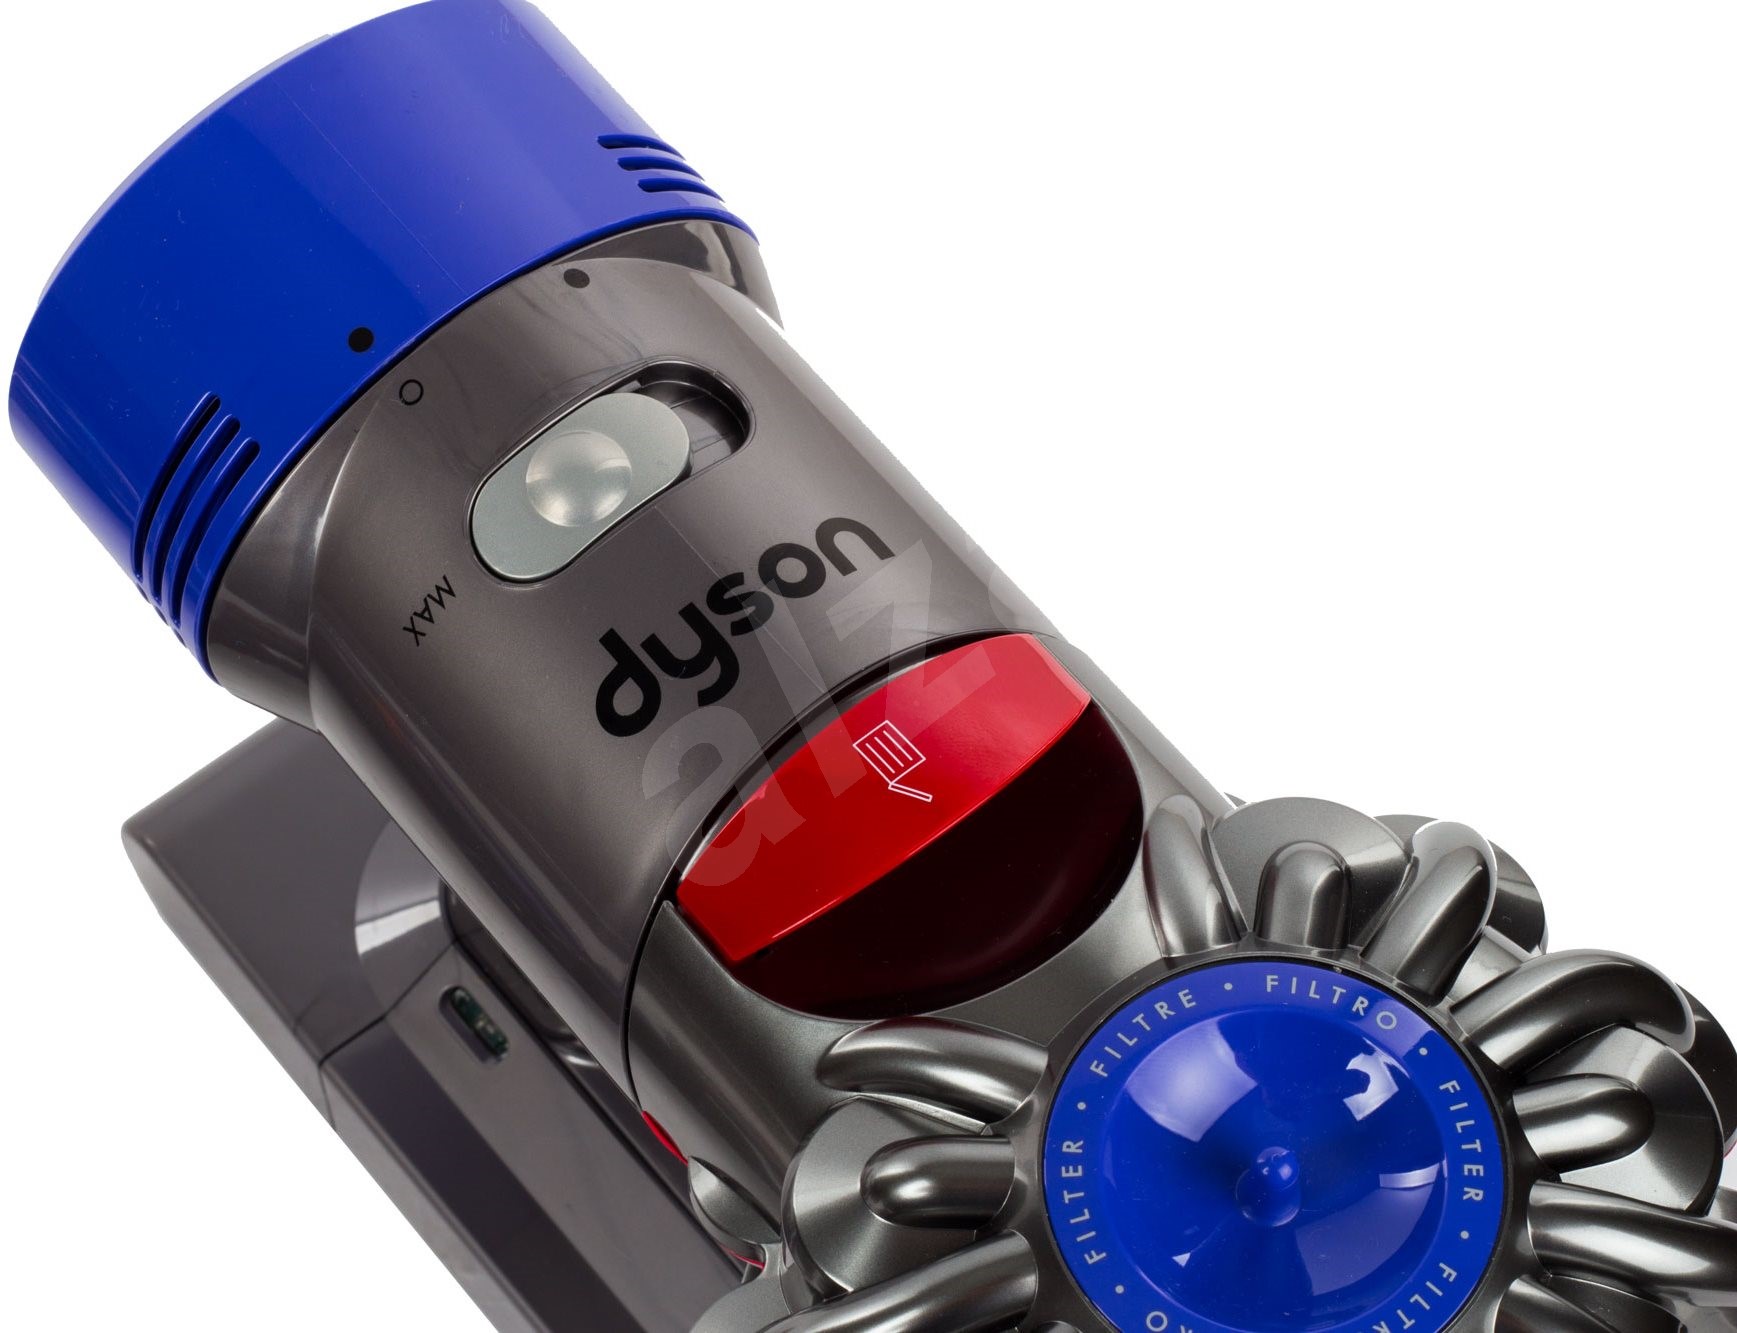 Dyson battery. Аккумулятор Dyson sv10. Dyson v8 sv10. Пылесос Dyson sv10. Dyson sv10 v8 absolute.